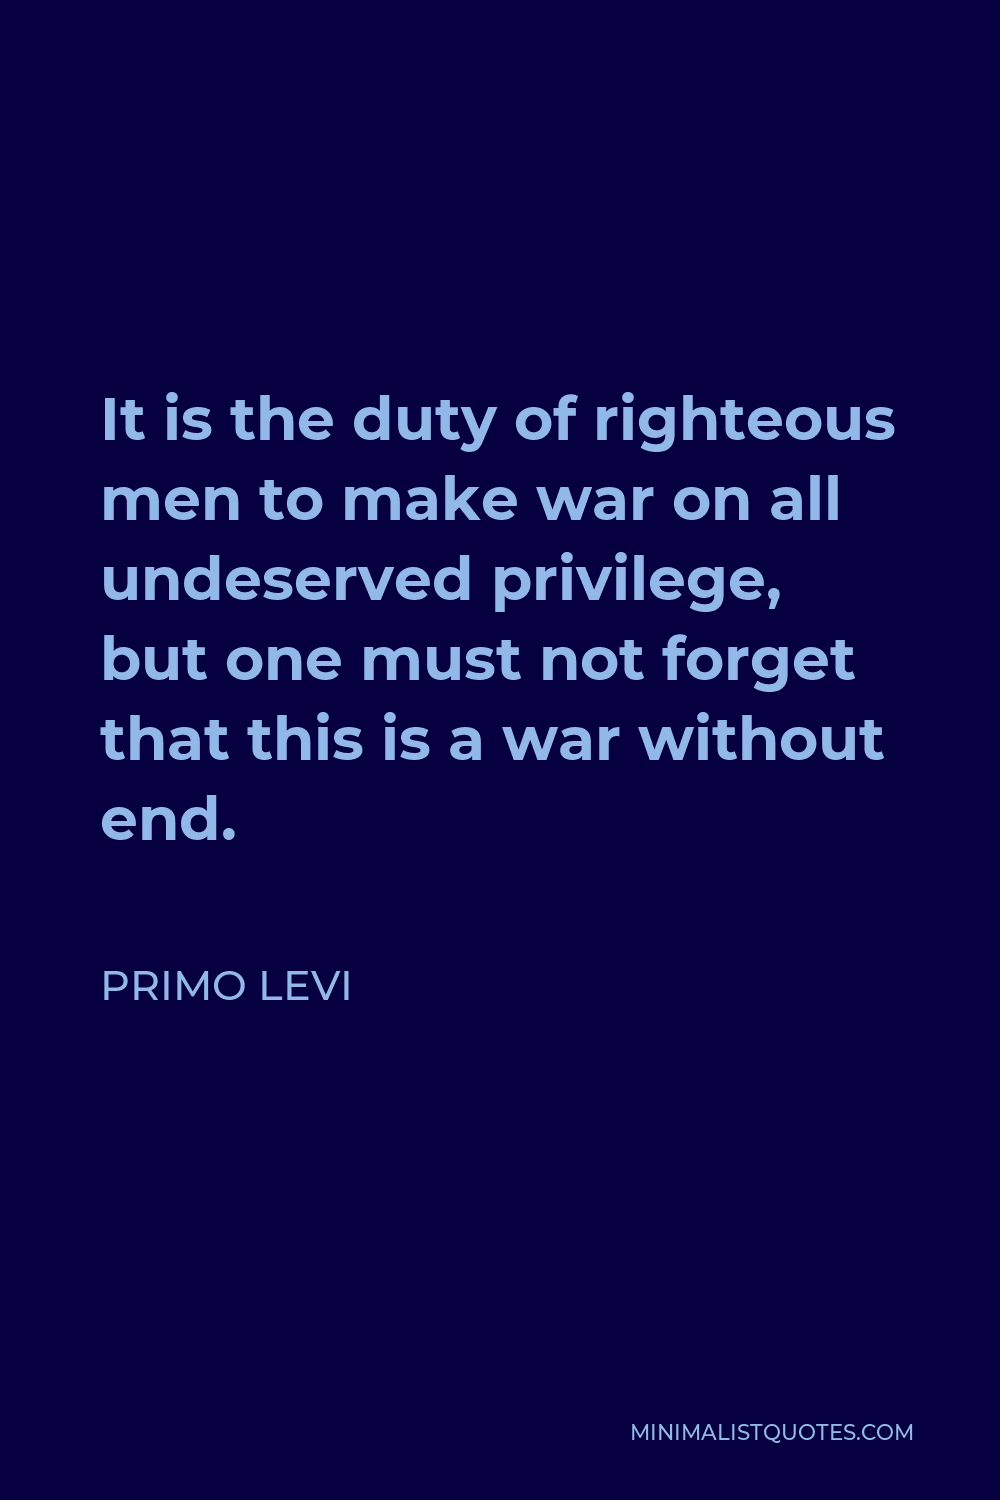 Primo Levi Quote - It is the duty of righteous men to make war on all undeserved privilege, but one must not forget that this is a war without end.